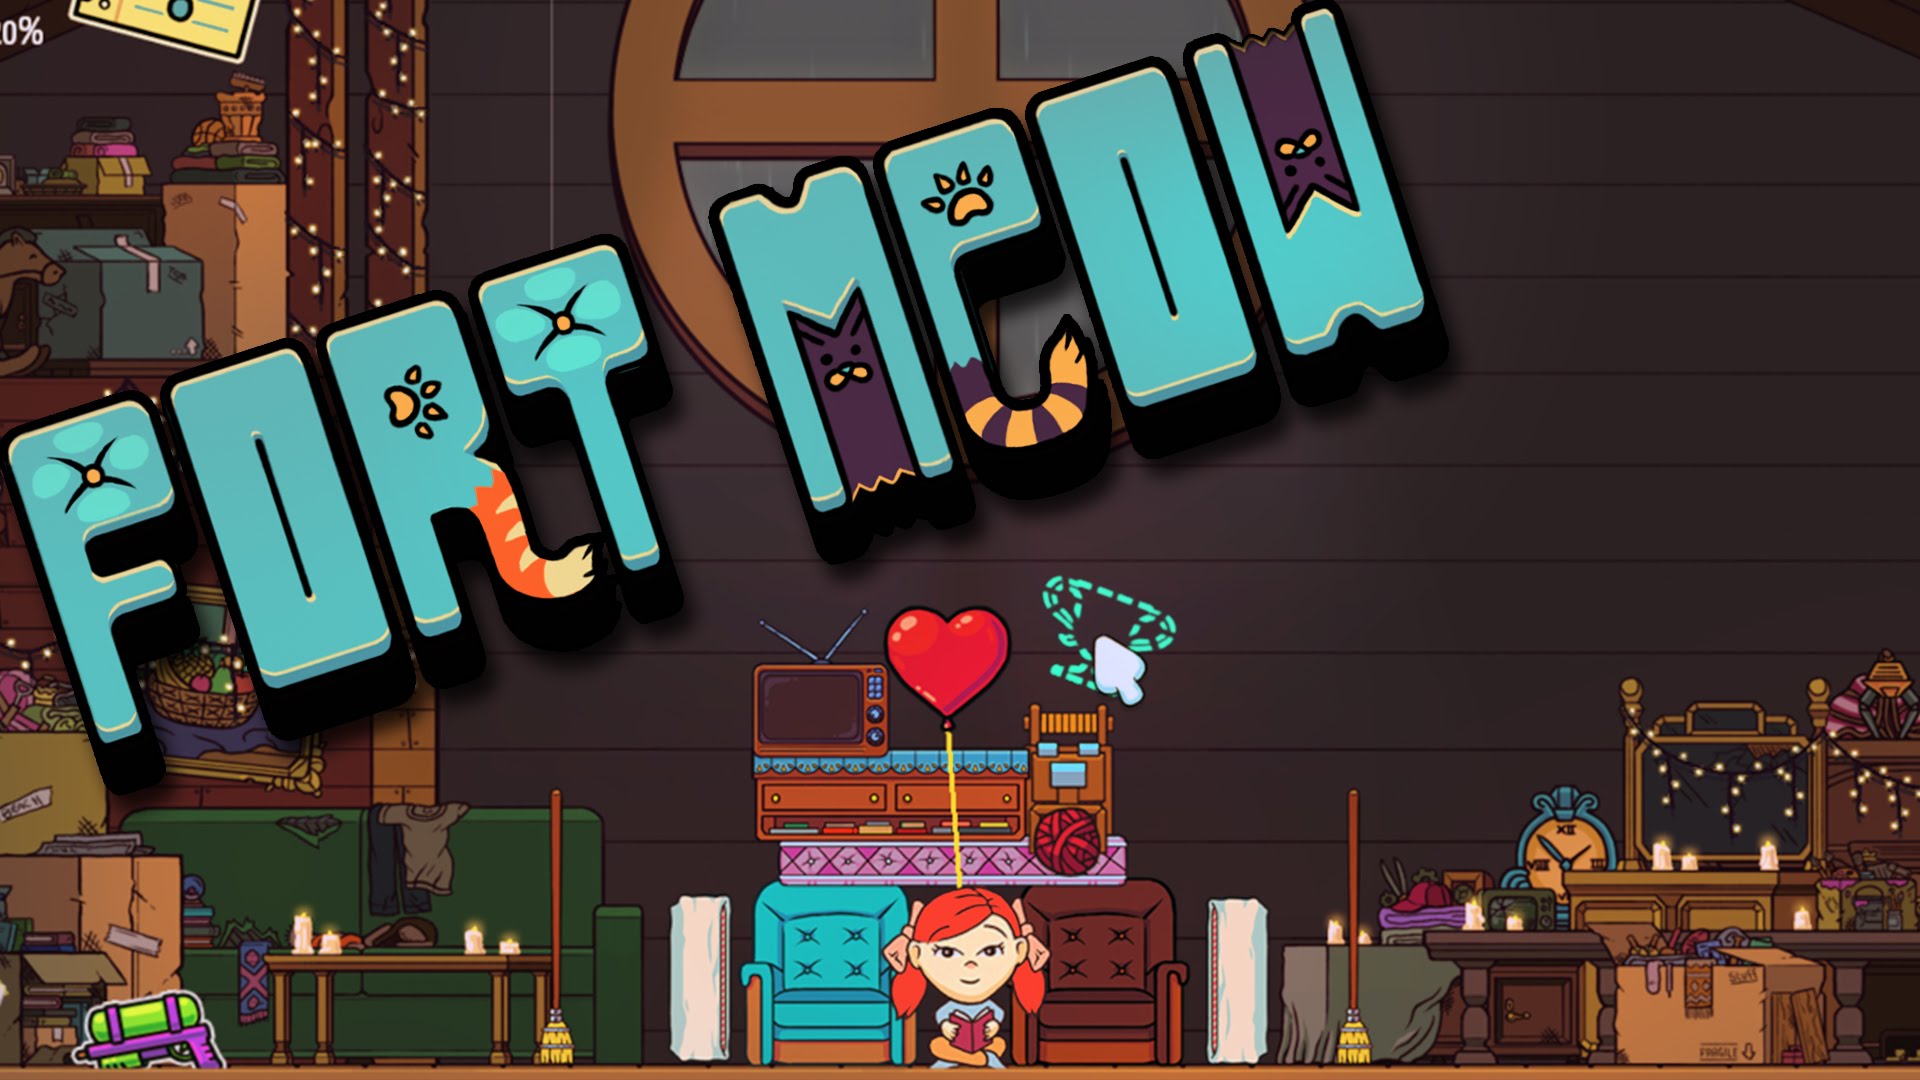 Fort Meow Backgrounds, Compatible - PC, Mobile, Gadgets| 1920x1080 px